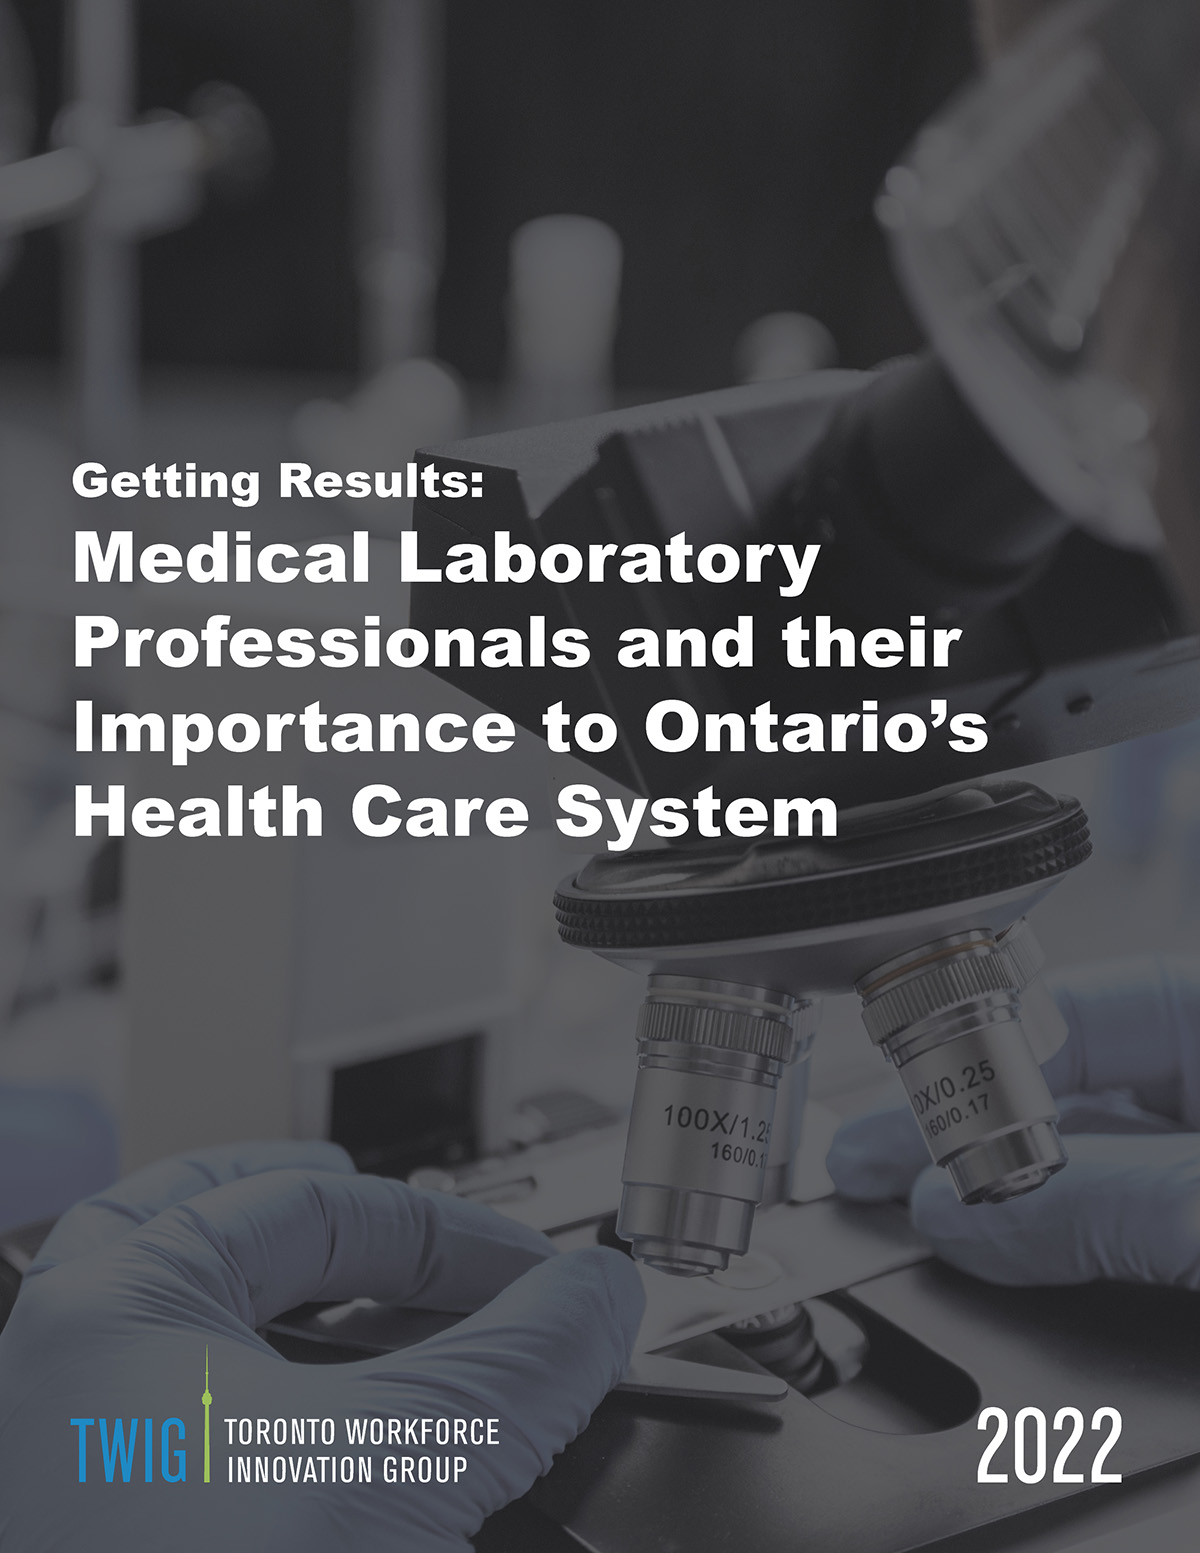 Medical Laboratory Professionals and their Importance to Ontario’s Health Care System